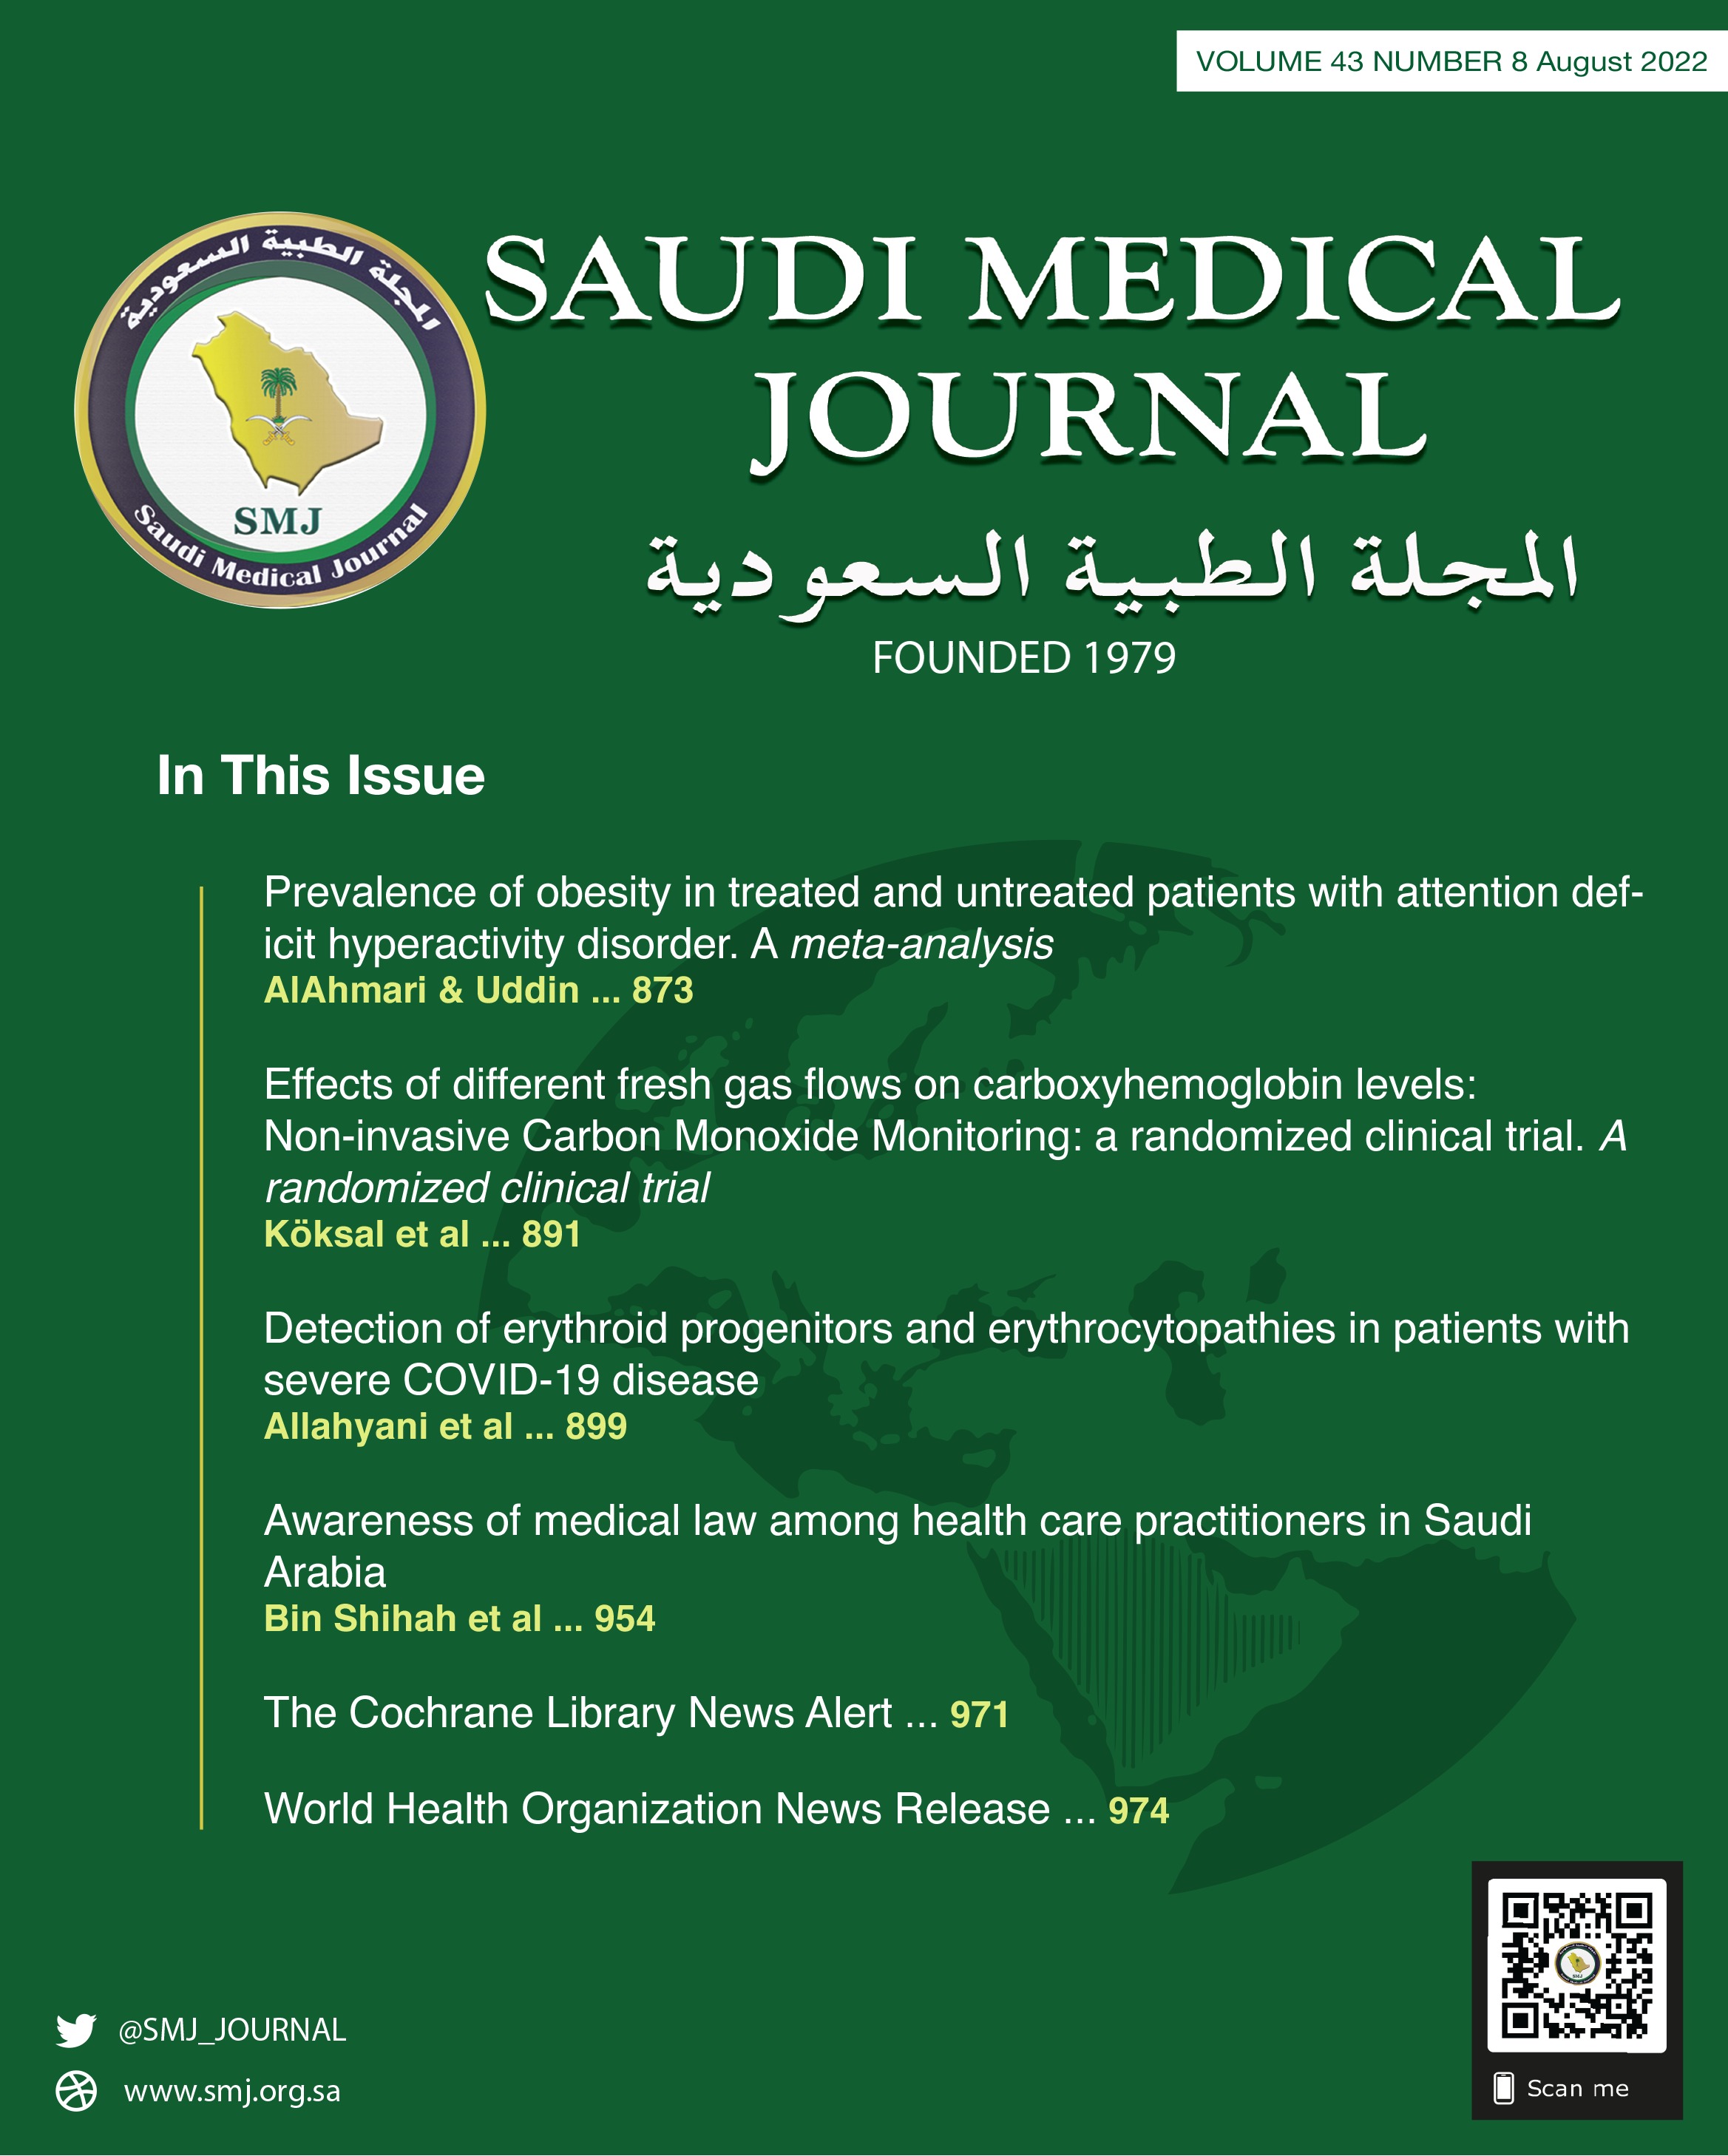 Survival, mortality, and related comorbidities among COVID-19 patients in Saudi Arabia: A hospital-based retrospective cohort study